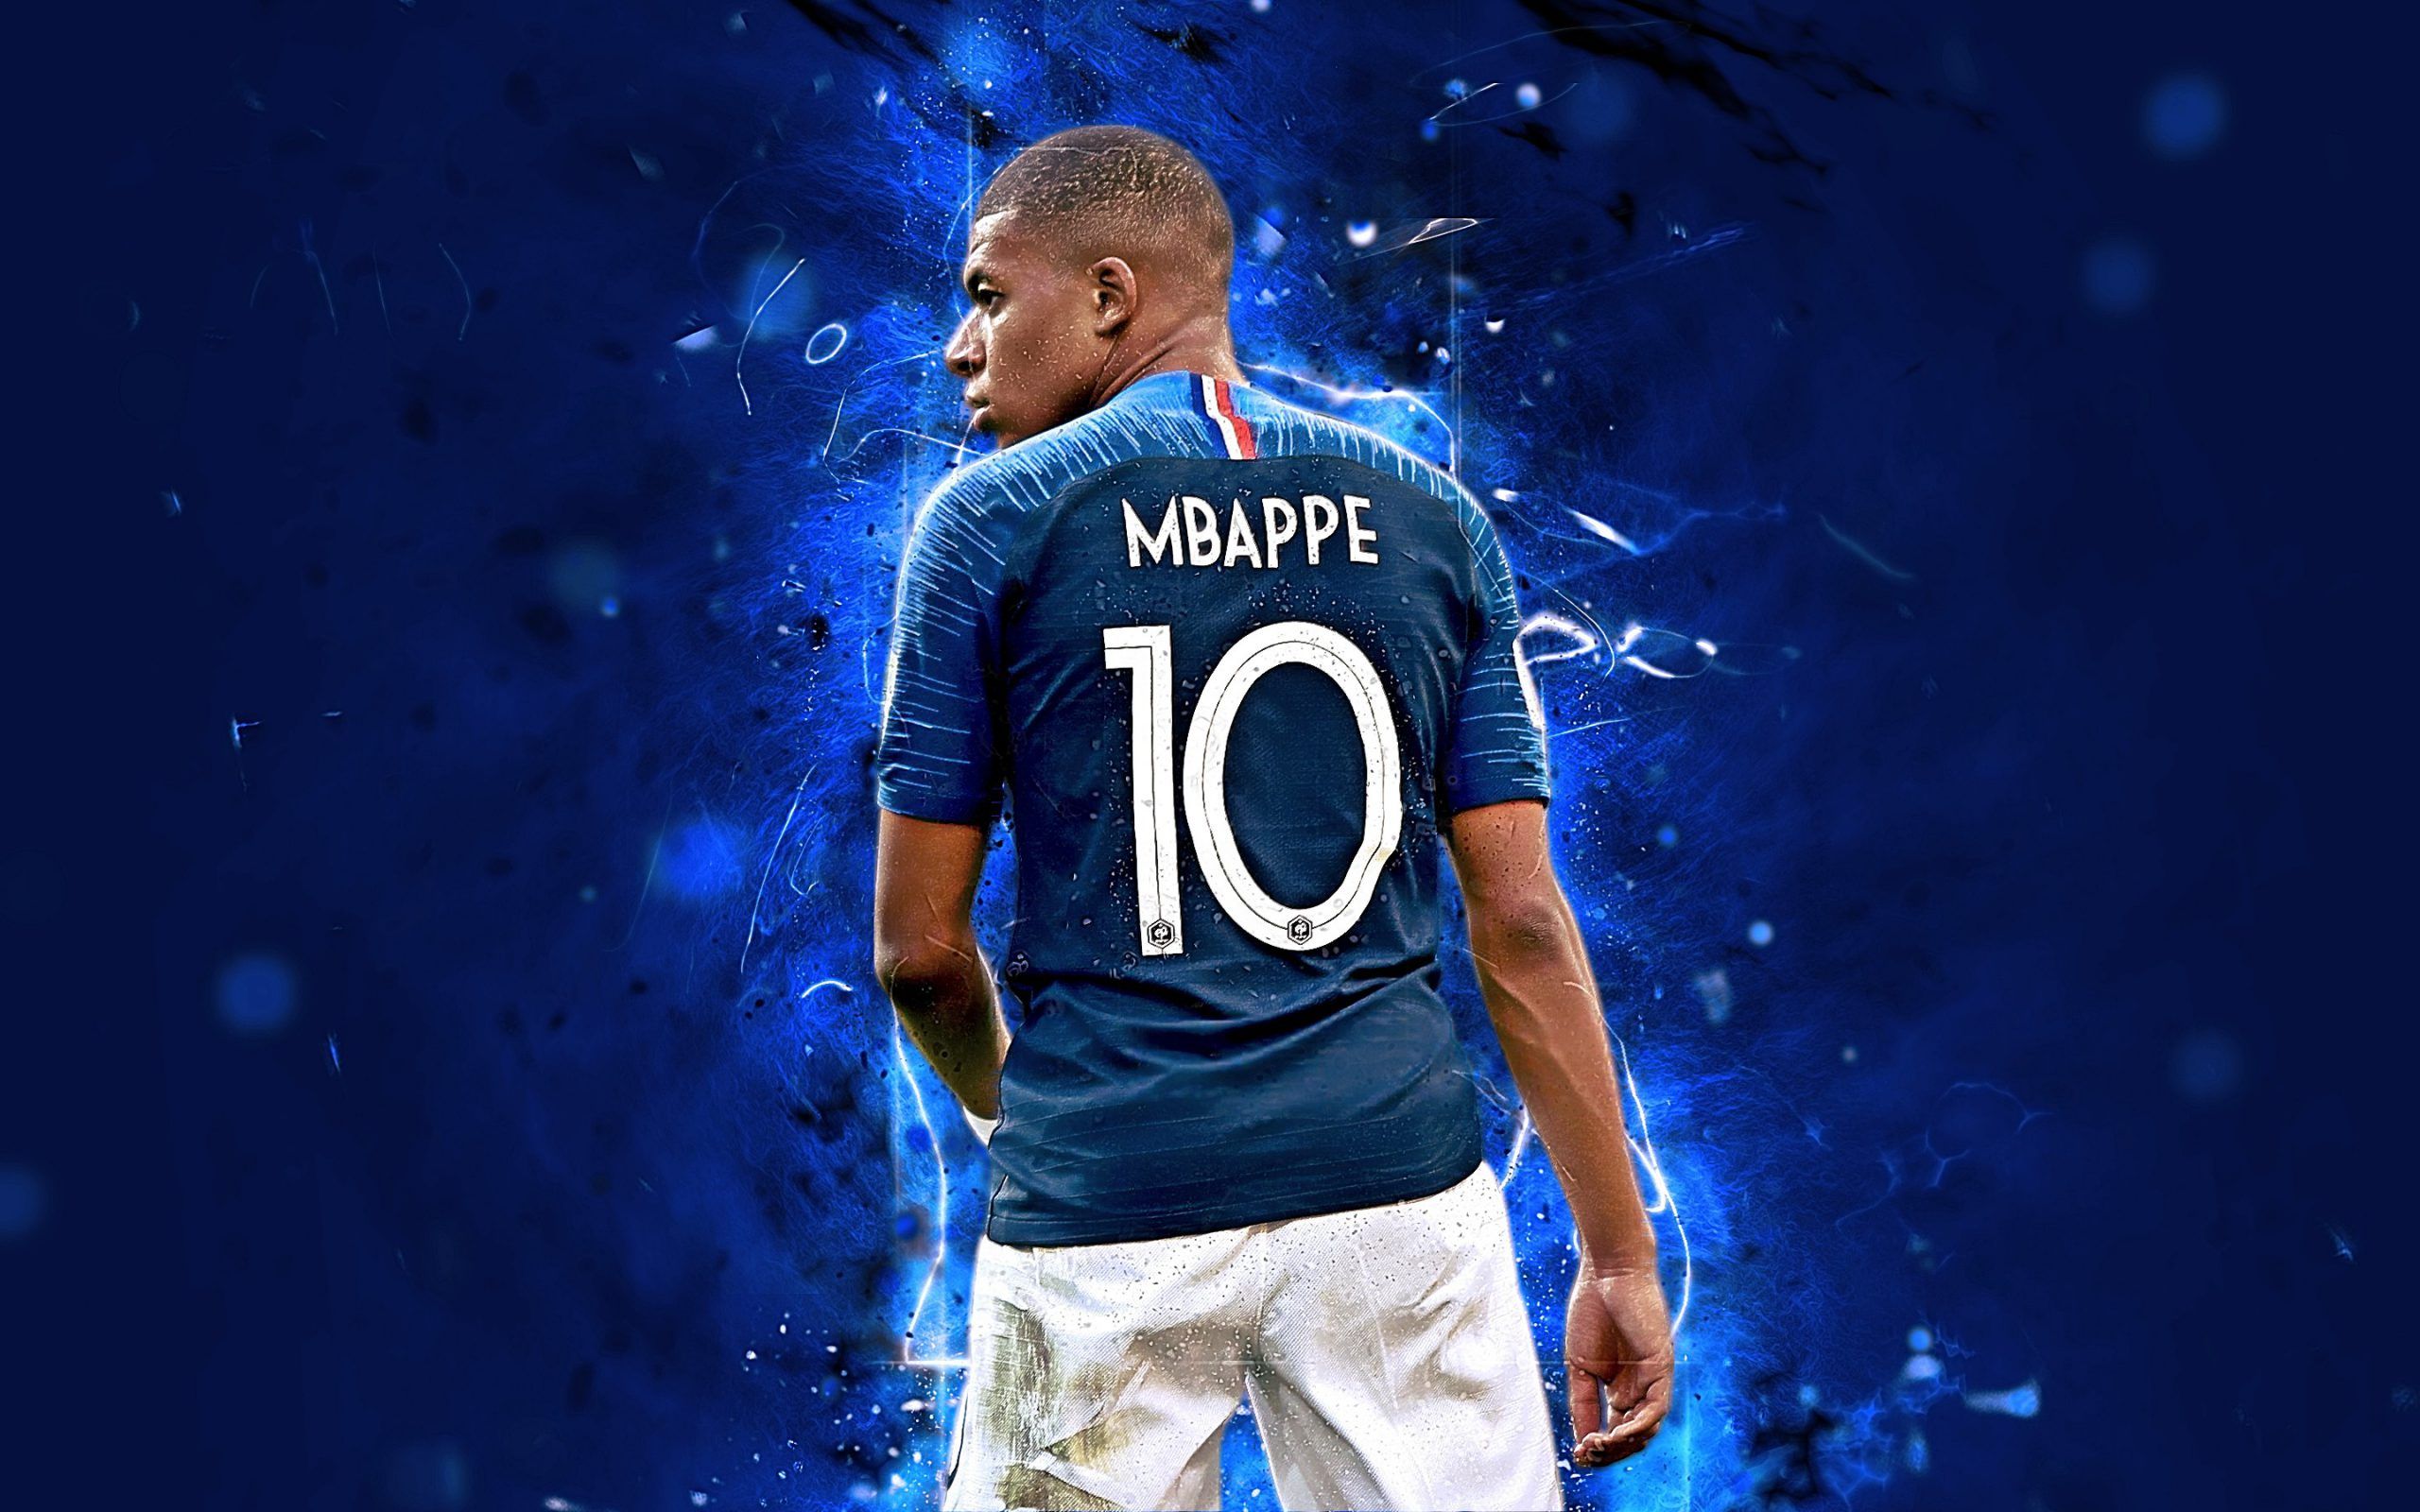 mbappe iPhone Wallpapers Free Download